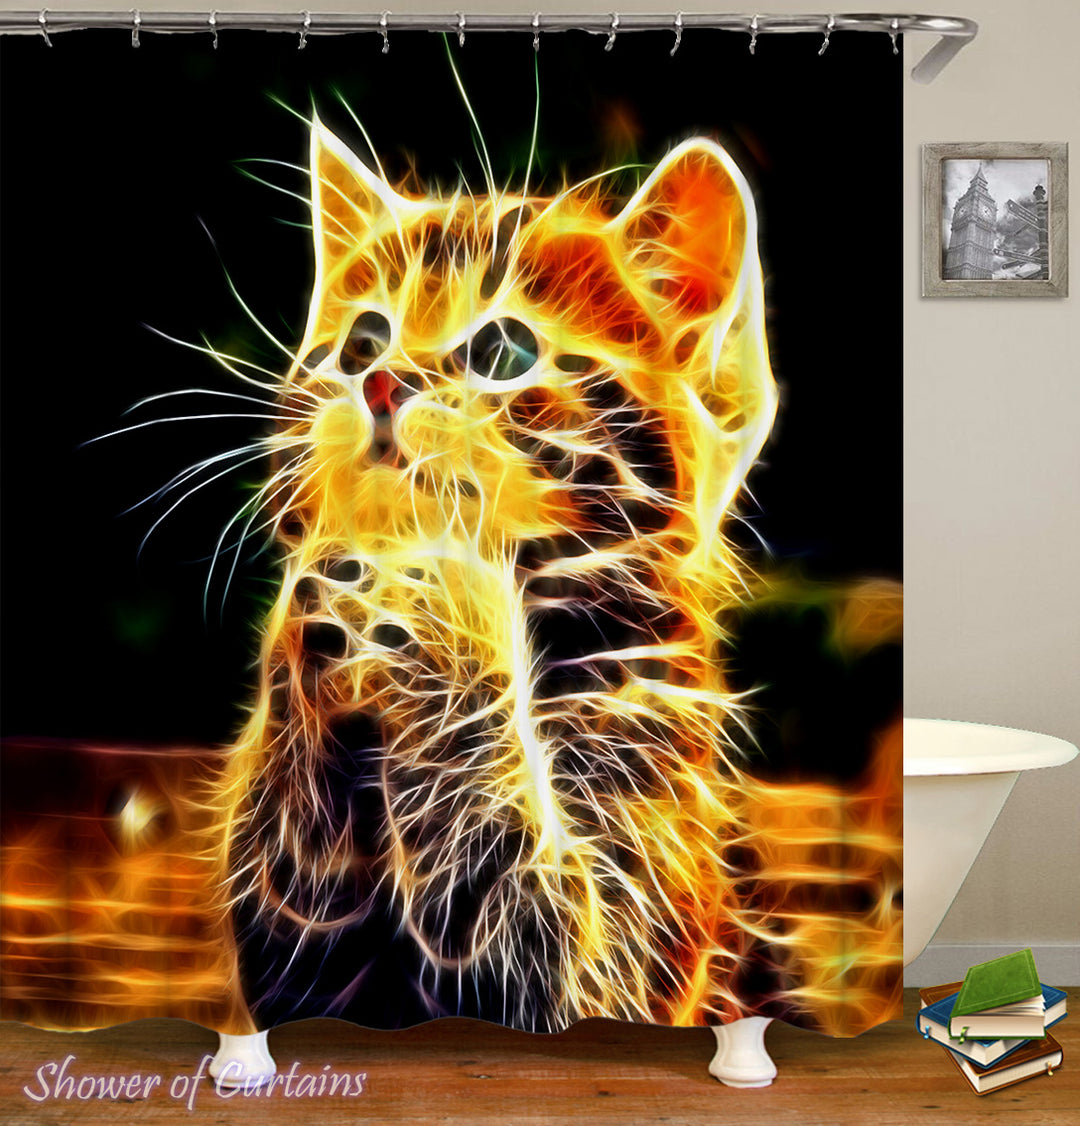 Cute Shower Curtains - Electric Cat shower curtain